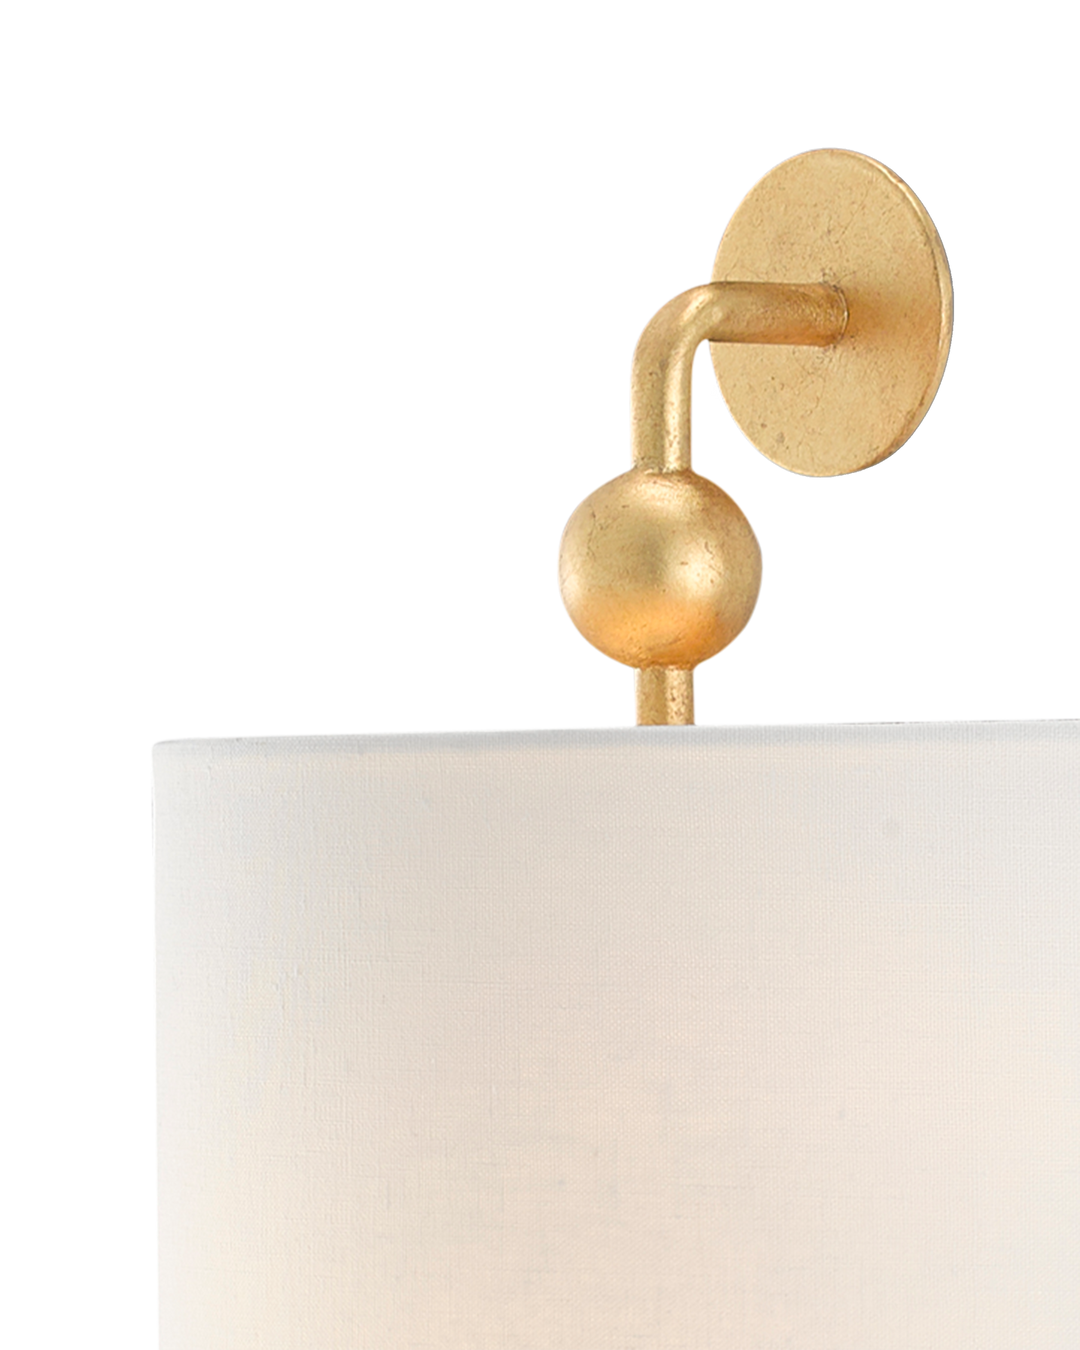 Tavey Gold Wall Sconce, White Shade